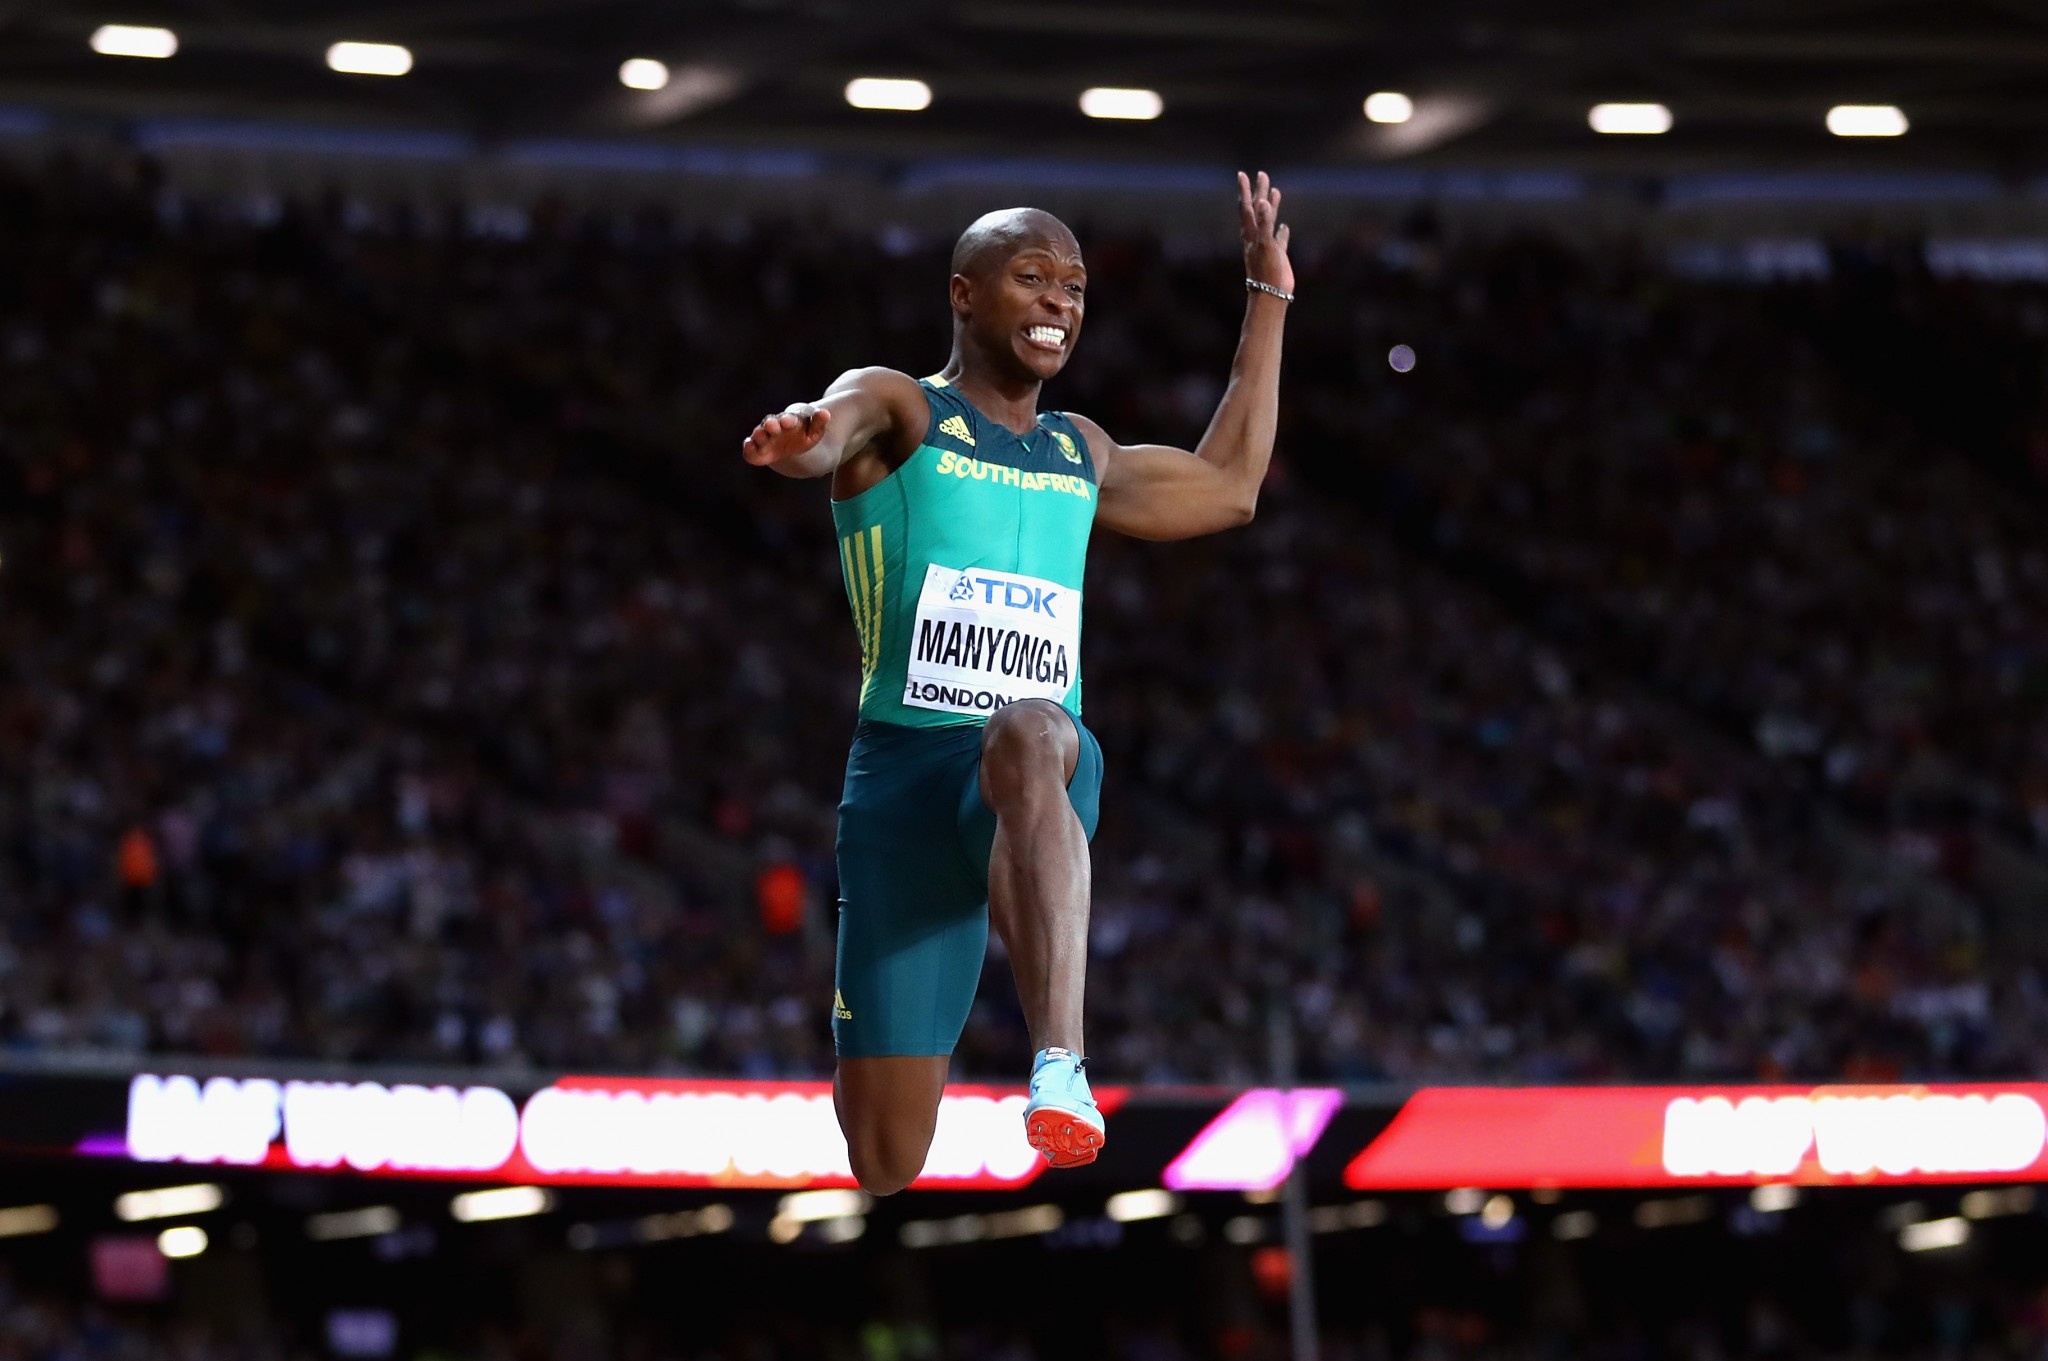 Luvo Manyonga pictured competing en route to victory in the men's long jump final ©Getty Images